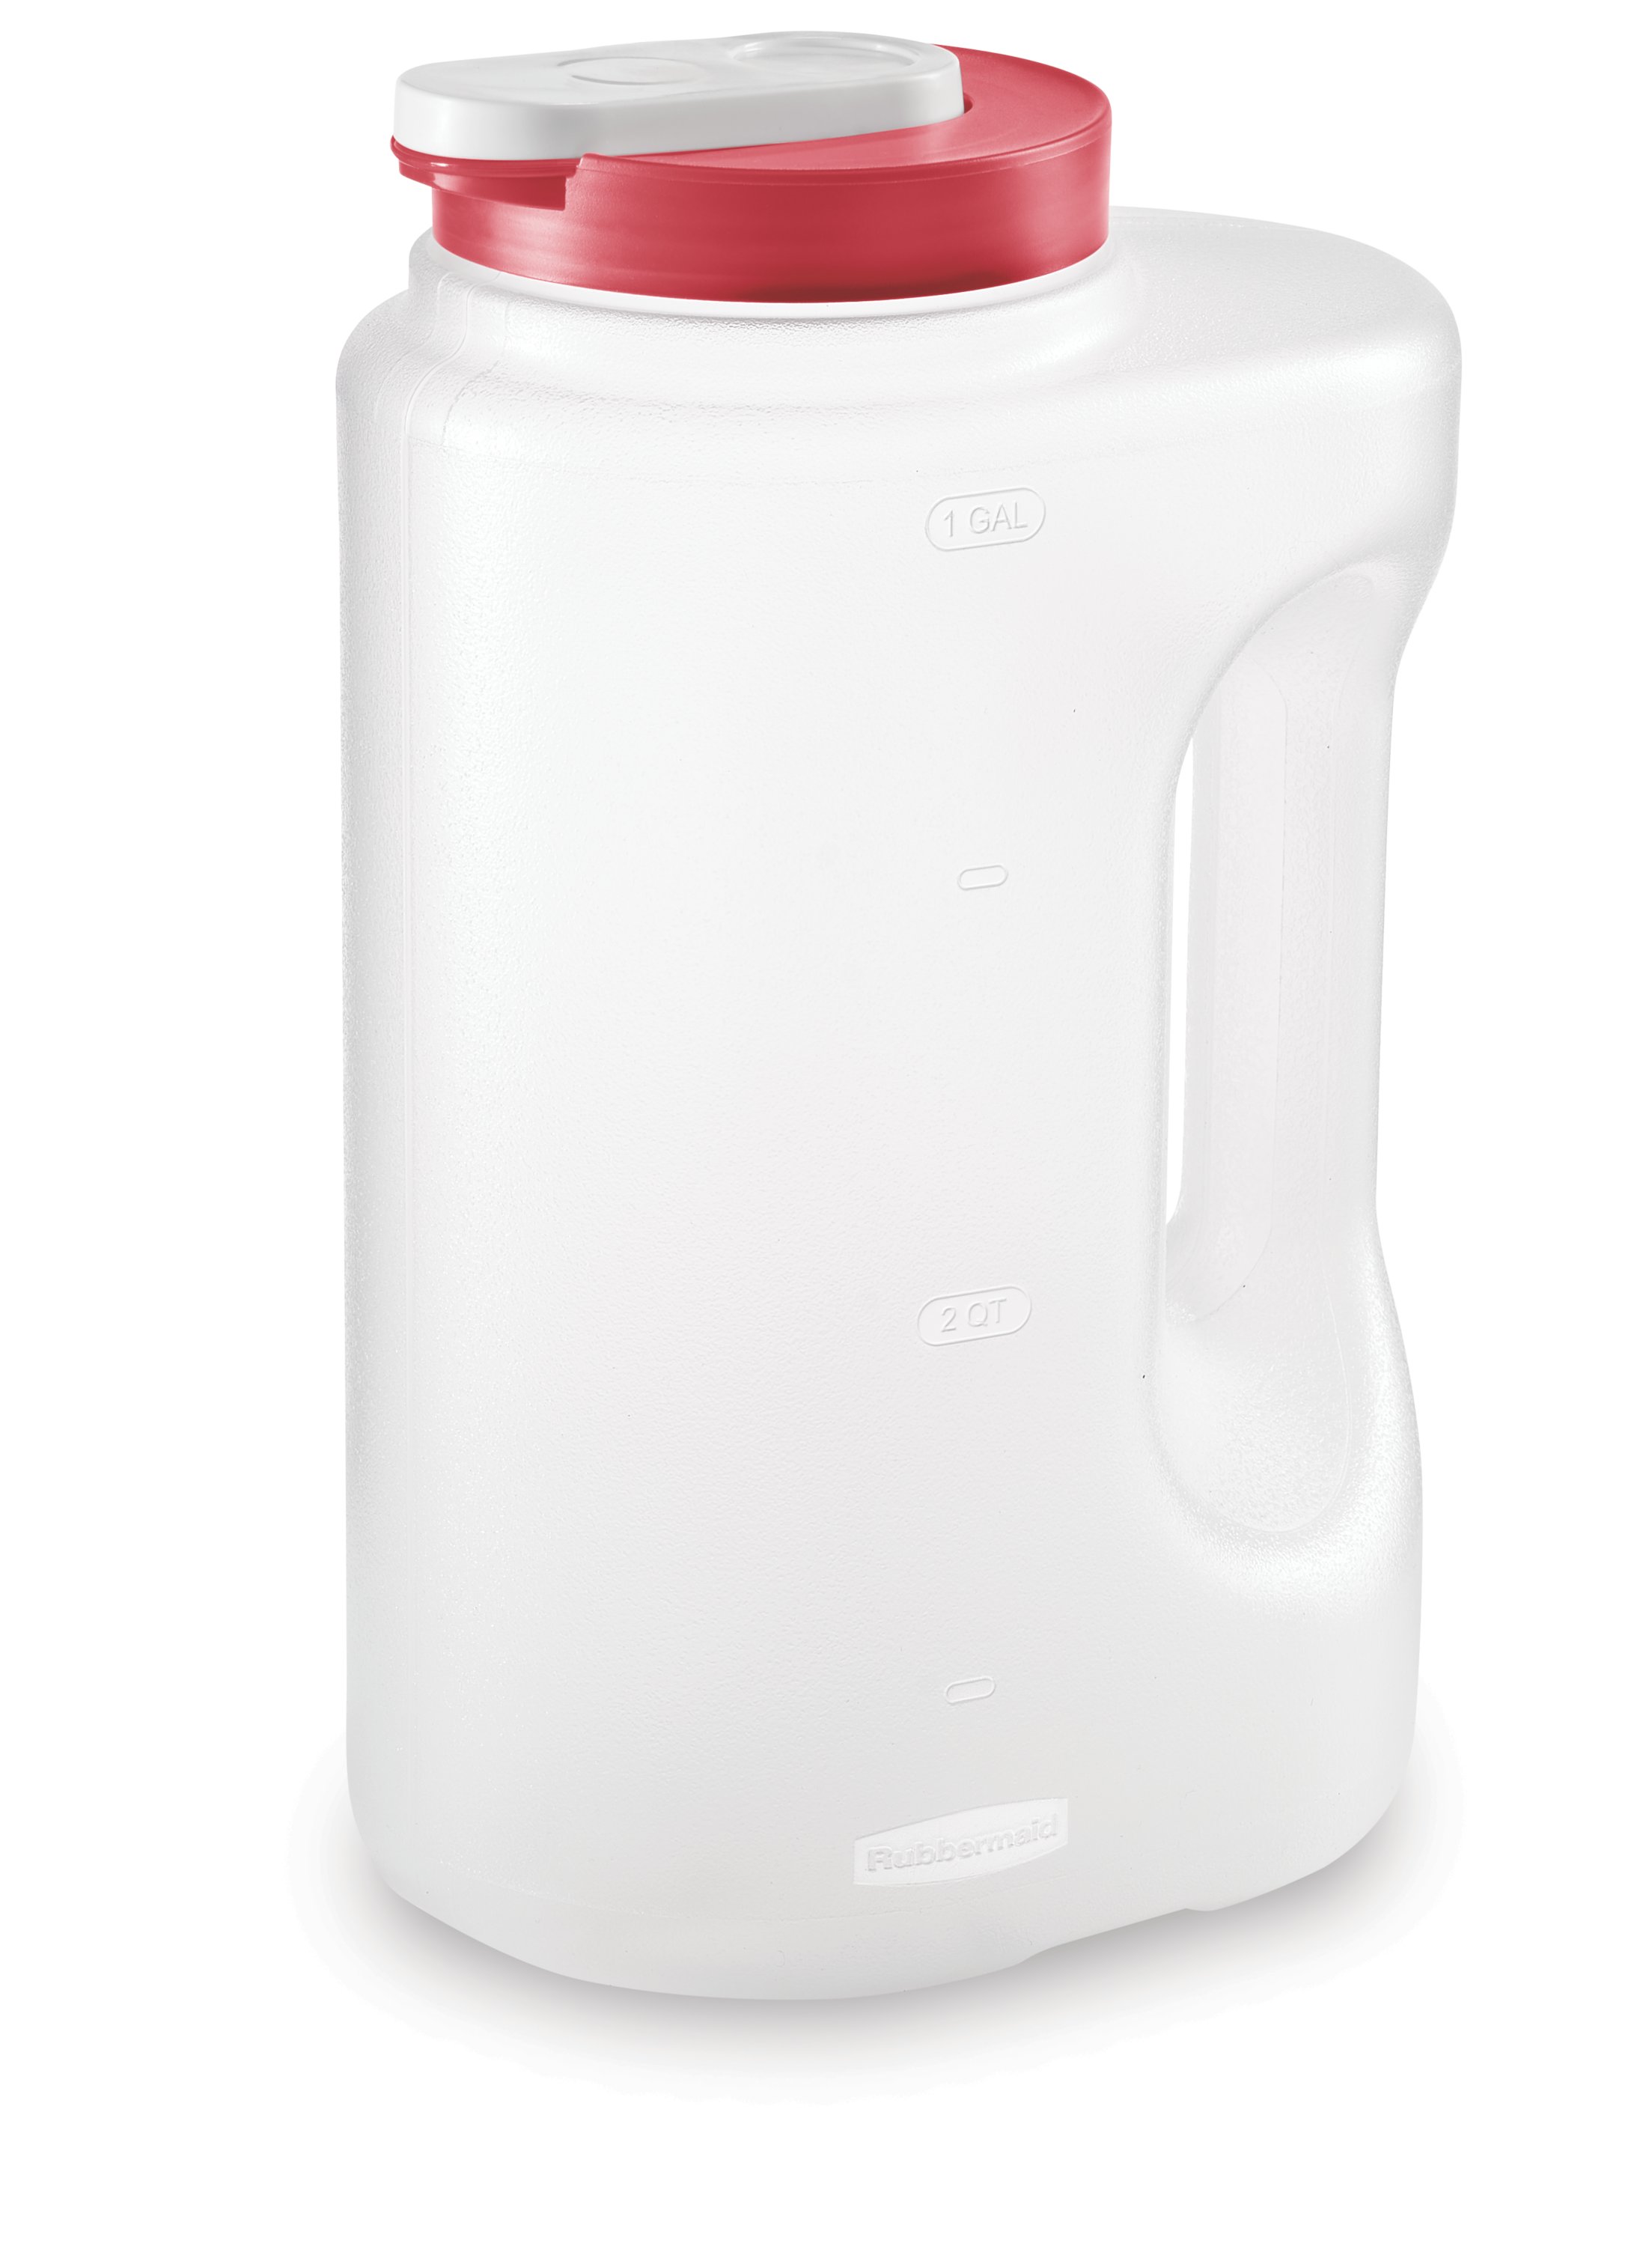 https://s7d9.scene7.com/is/image/NewellRubbermaid/2122604-rubbermaid-food-storage-mixermate-pitcher-1g-red-angle